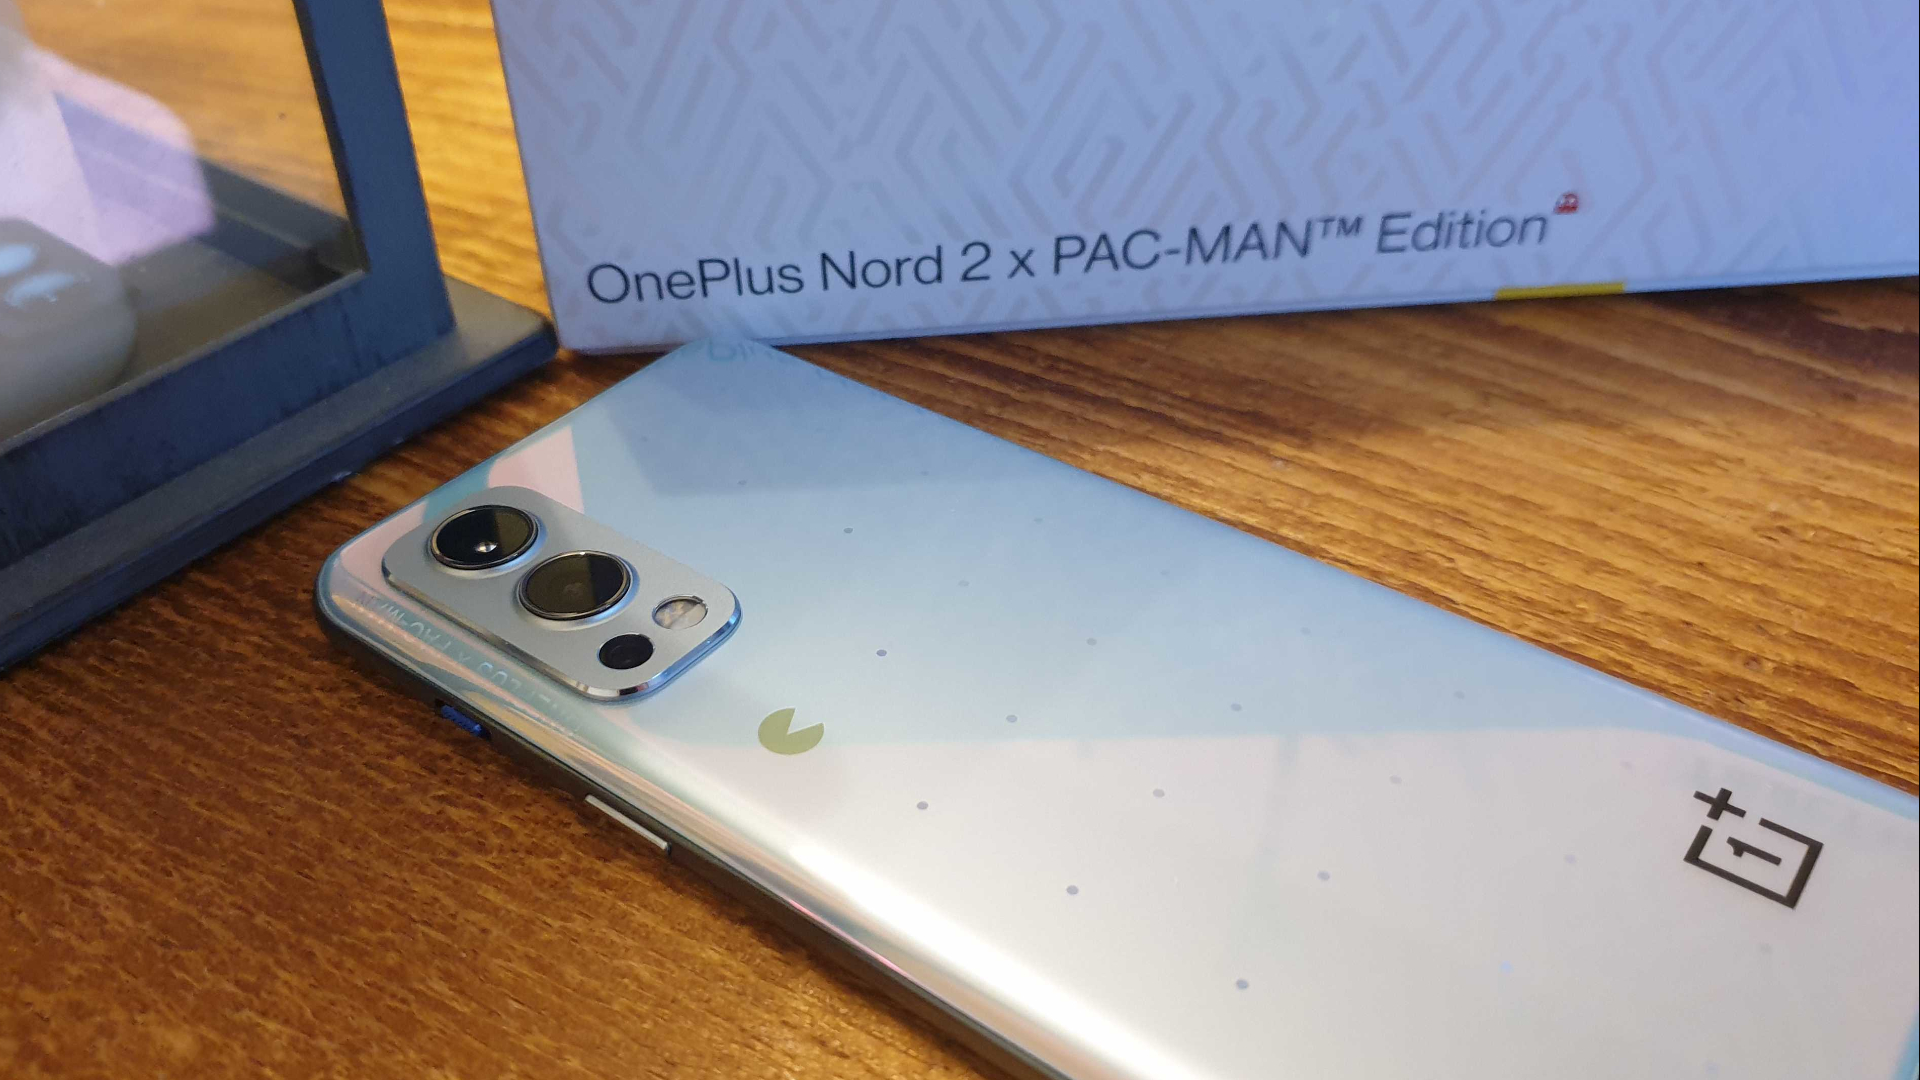 OnePlus Nord 2: A perfectly good smartphone